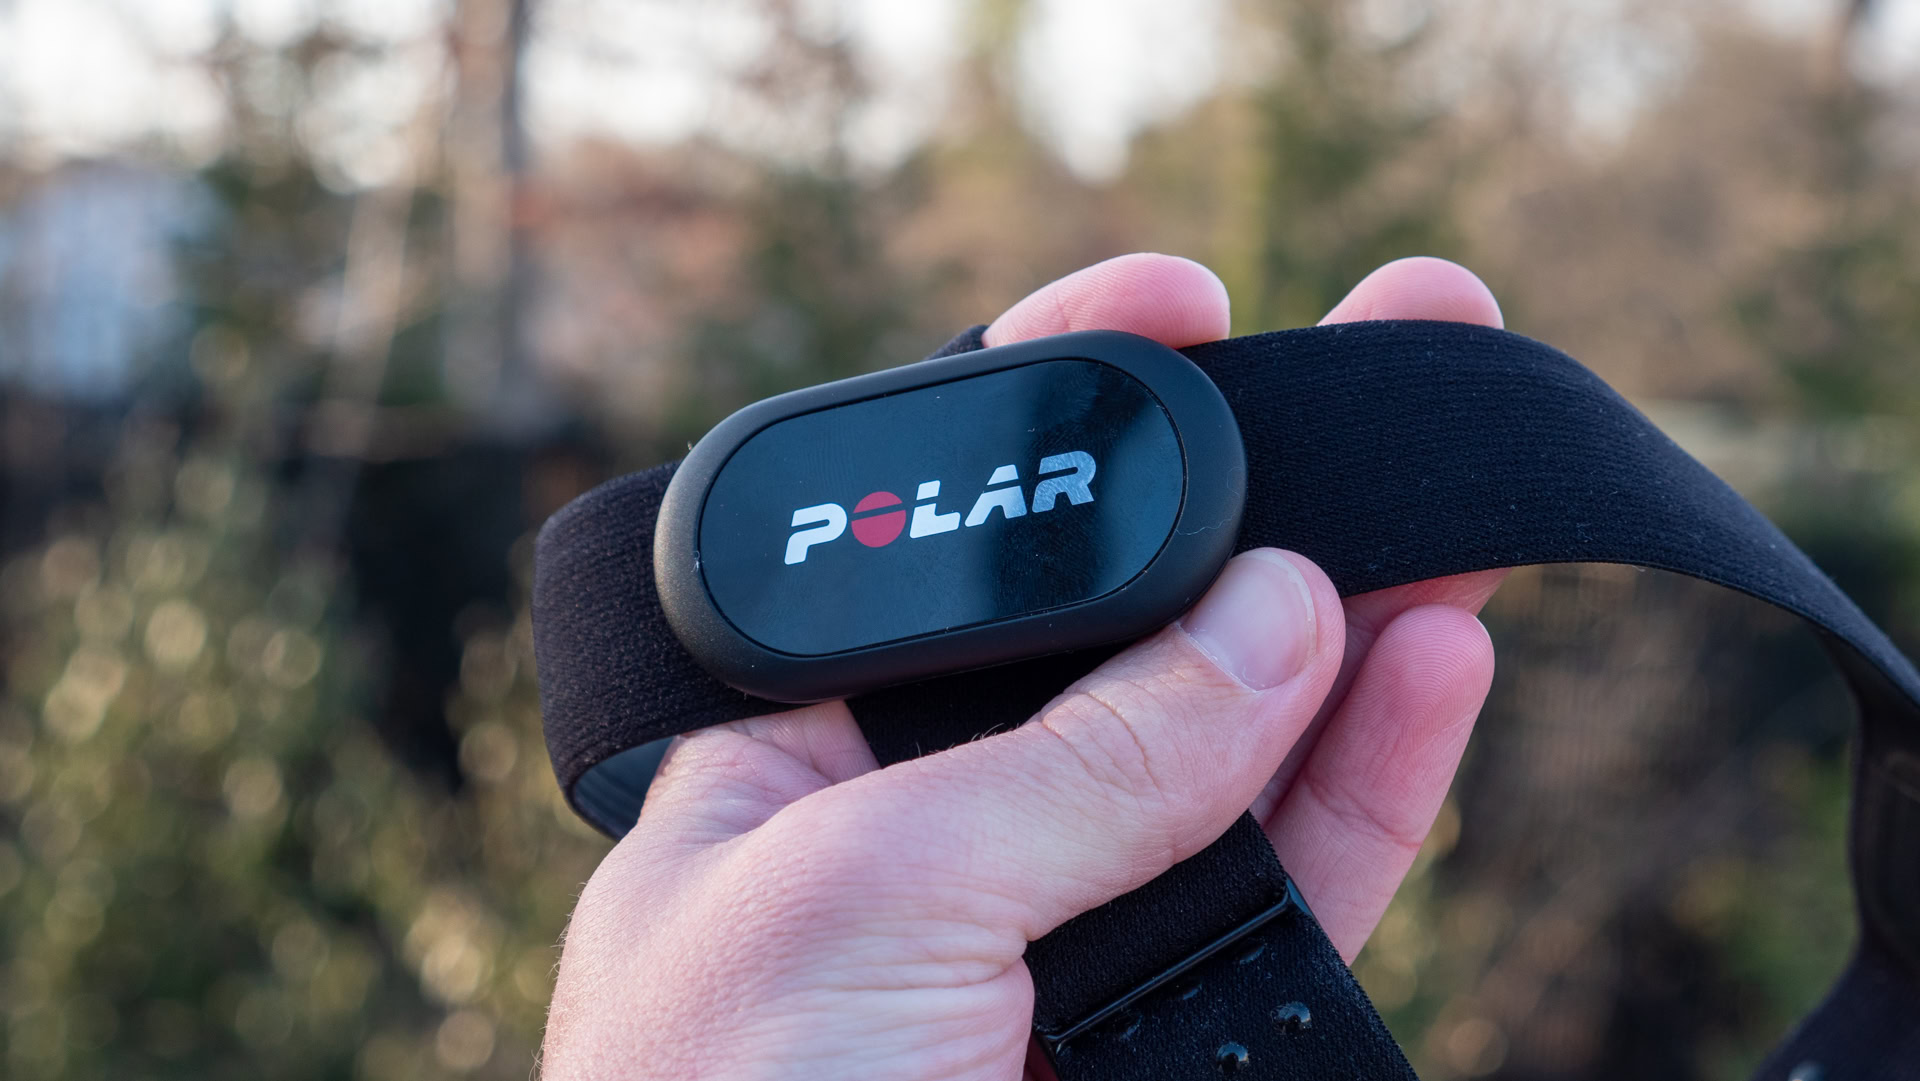 The best Polar watches: Vantage, Grit, Ingnite, and more - Android Authority